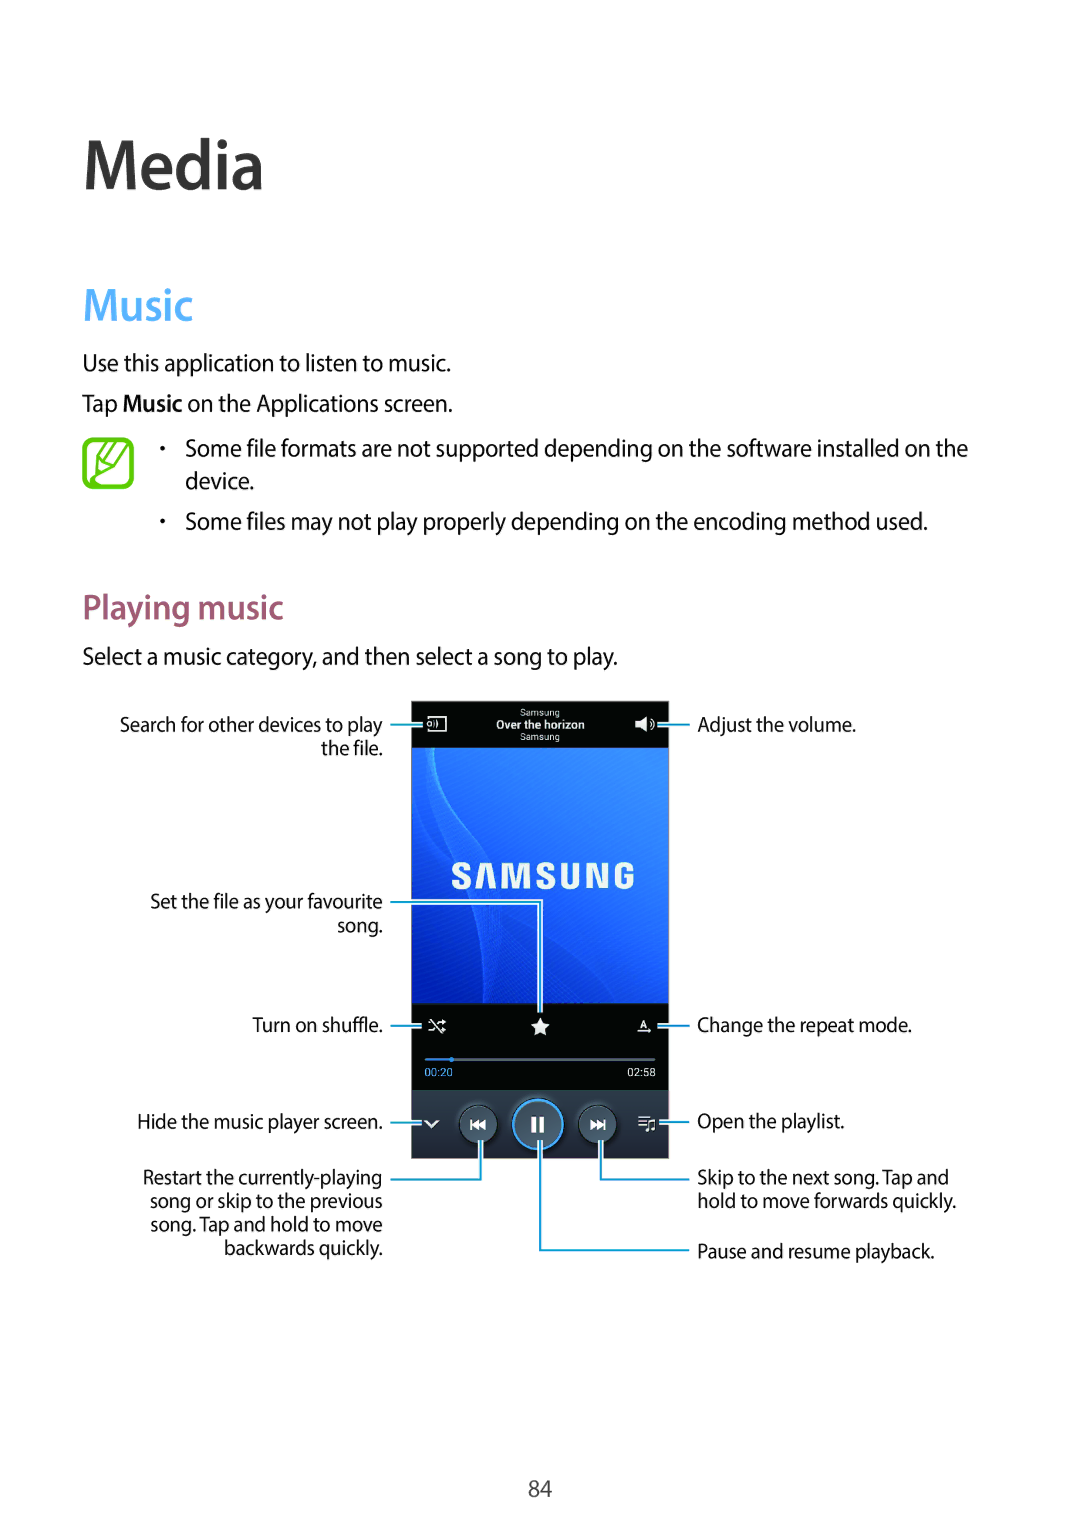 Samsung SM-N7500ZWATHR manual Media, Music, Playing music, Select a music category, and then select a song to play 